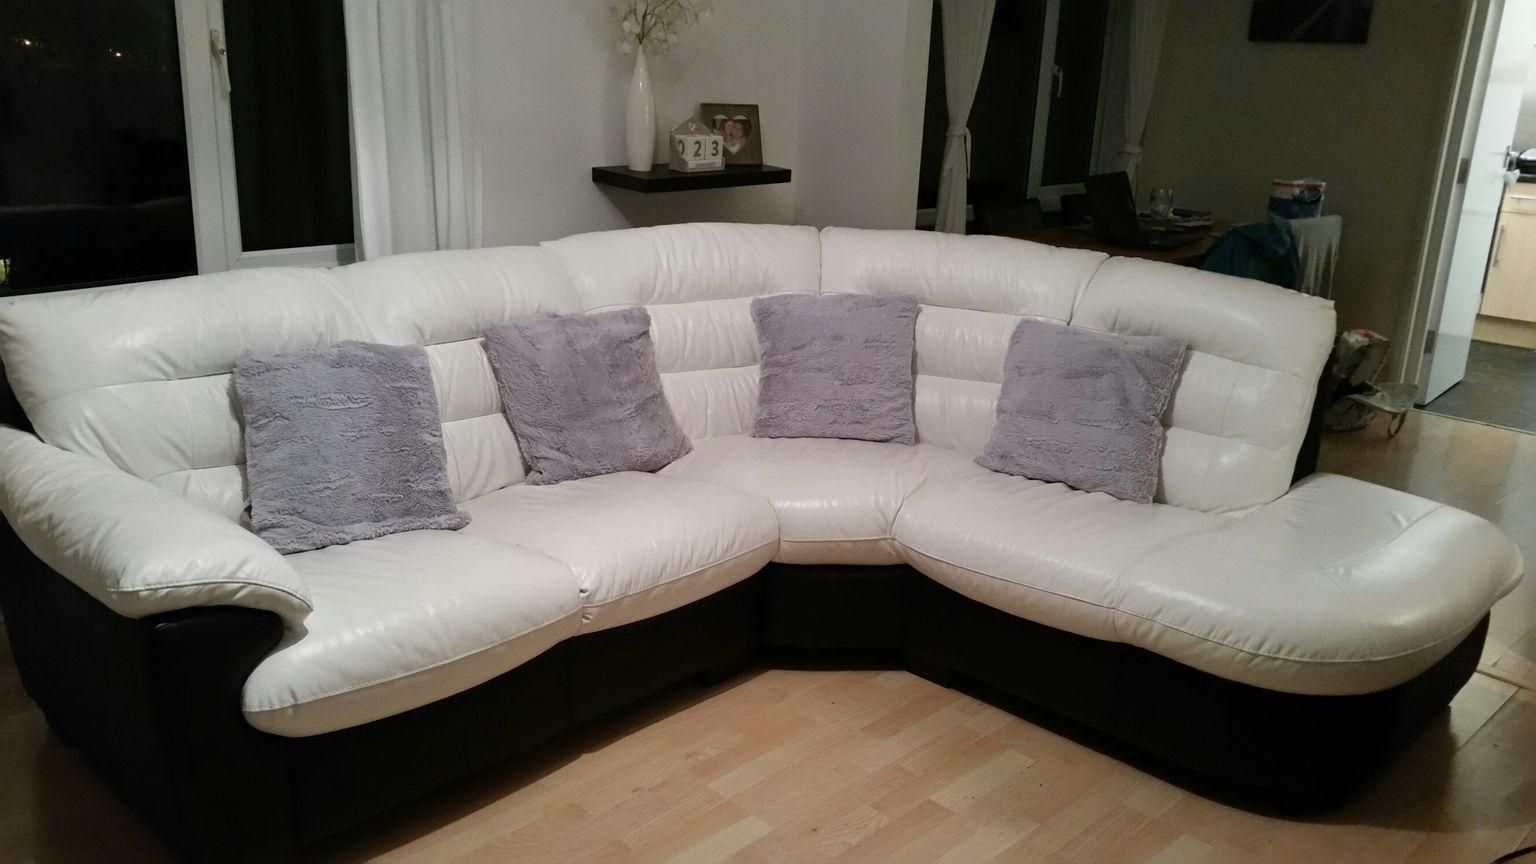 Robertson Comfort Sofa, Loveseat And Chair And A Half Set – Beige Intended For Skyline Sofas (View 6 of 20)